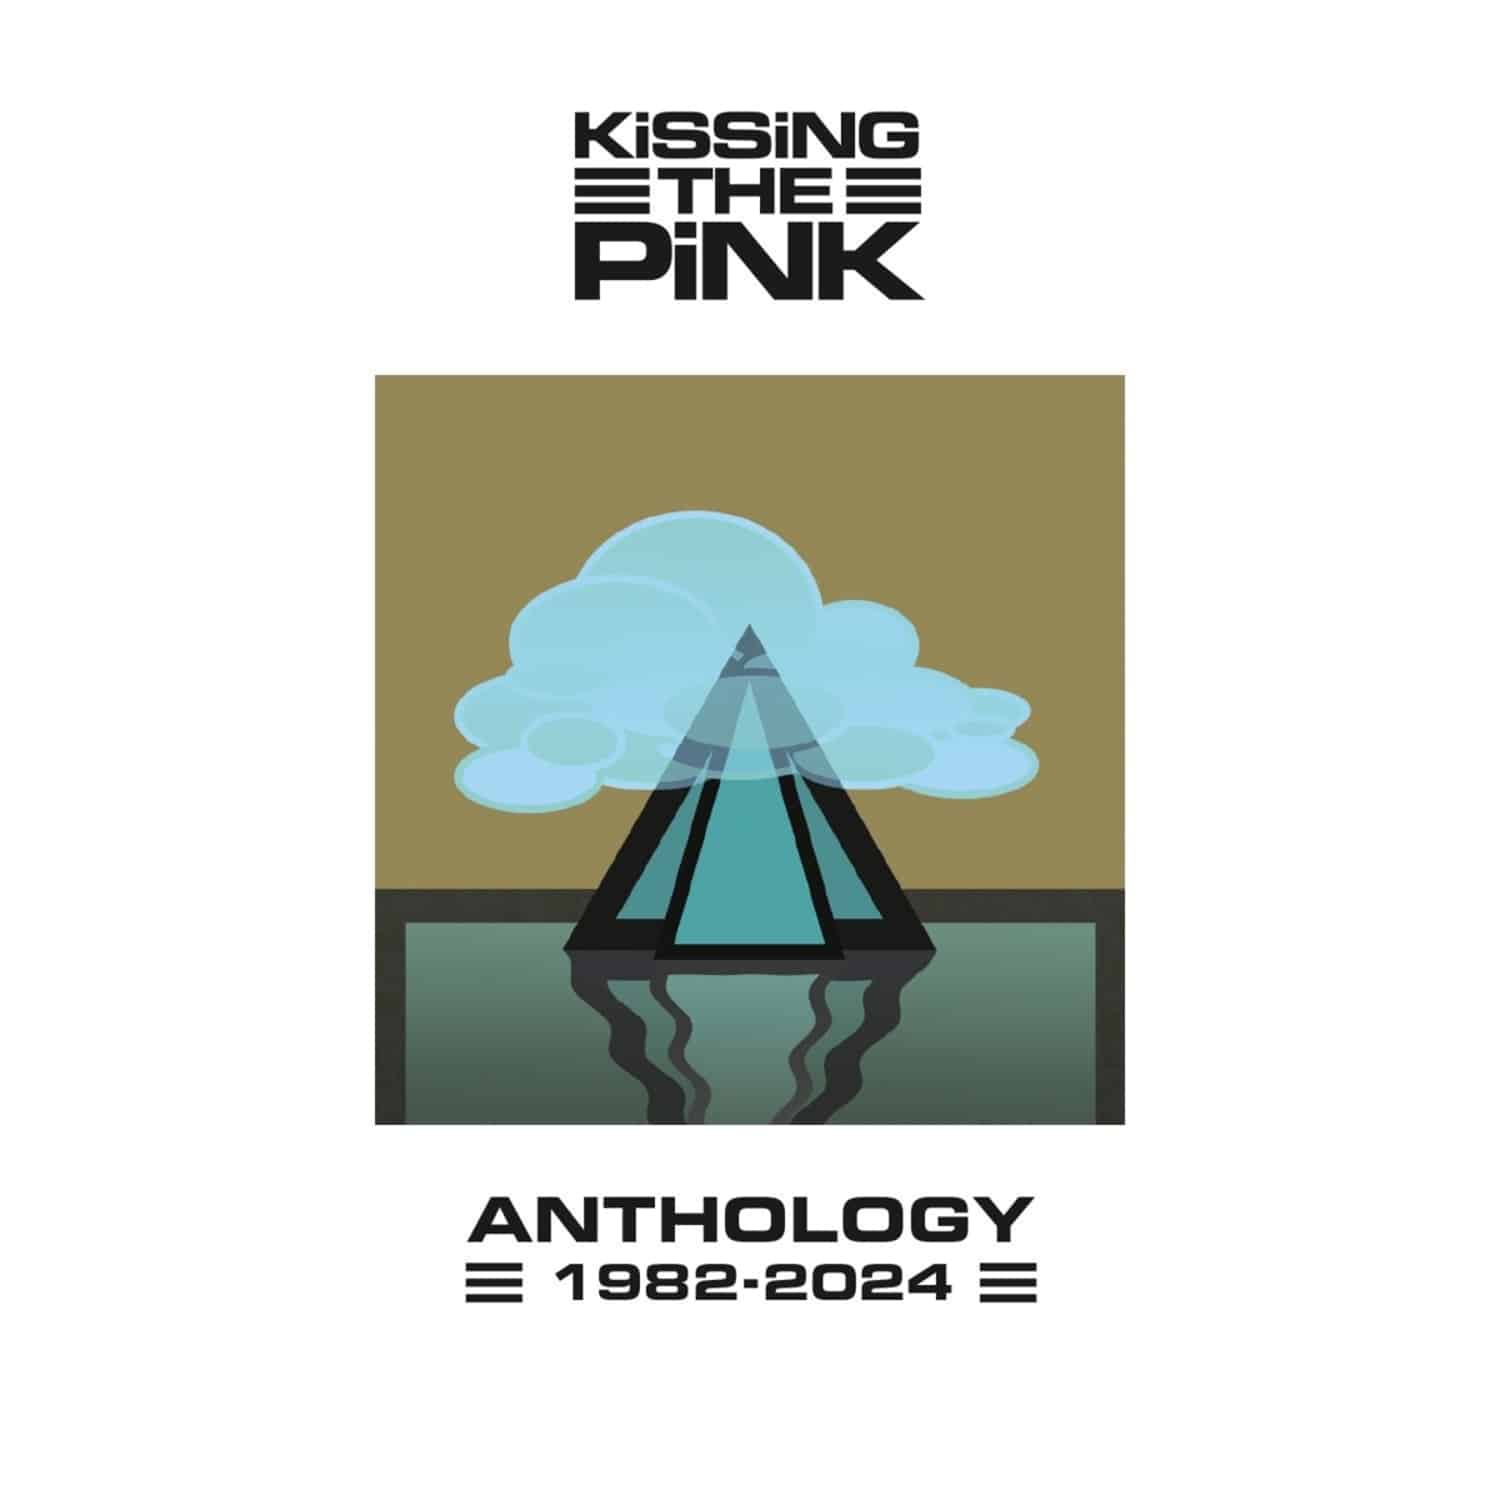 Kissing The Pink - ANTHOLOGY 1982-2024 